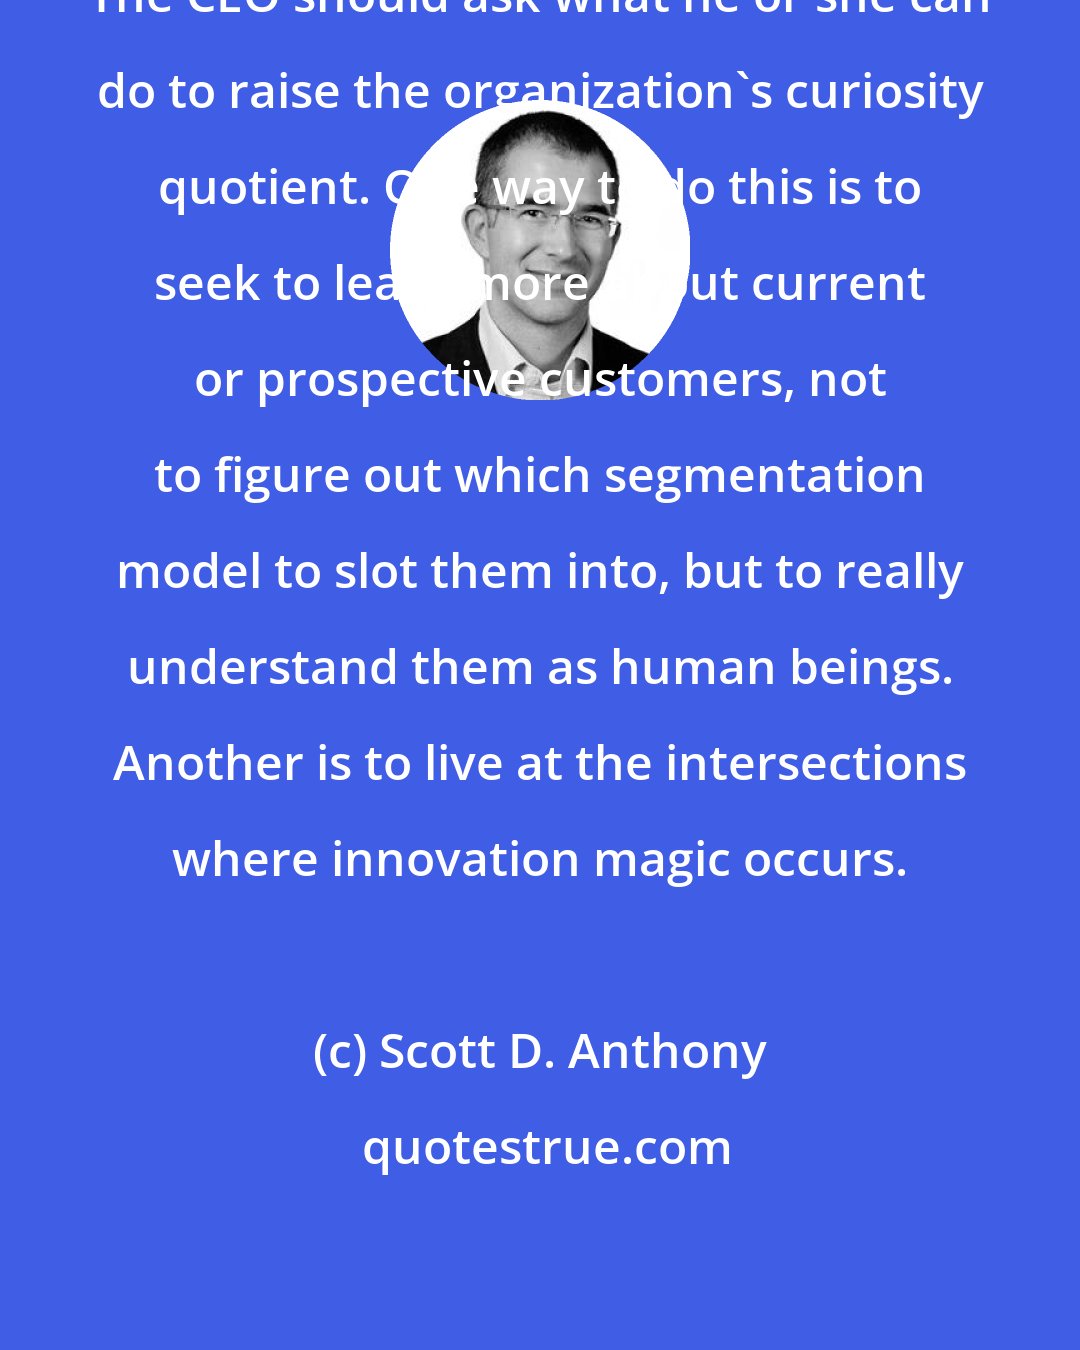 Scott D. Anthony: The CEO should ask what he or she can do to raise the organization's curiosity quotient. One way to do this is to seek to learn more about current or prospective customers, not to figure out which segmentation model to slot them into, but to really understand them as human beings. Another is to live at the intersections where innovation magic occurs.